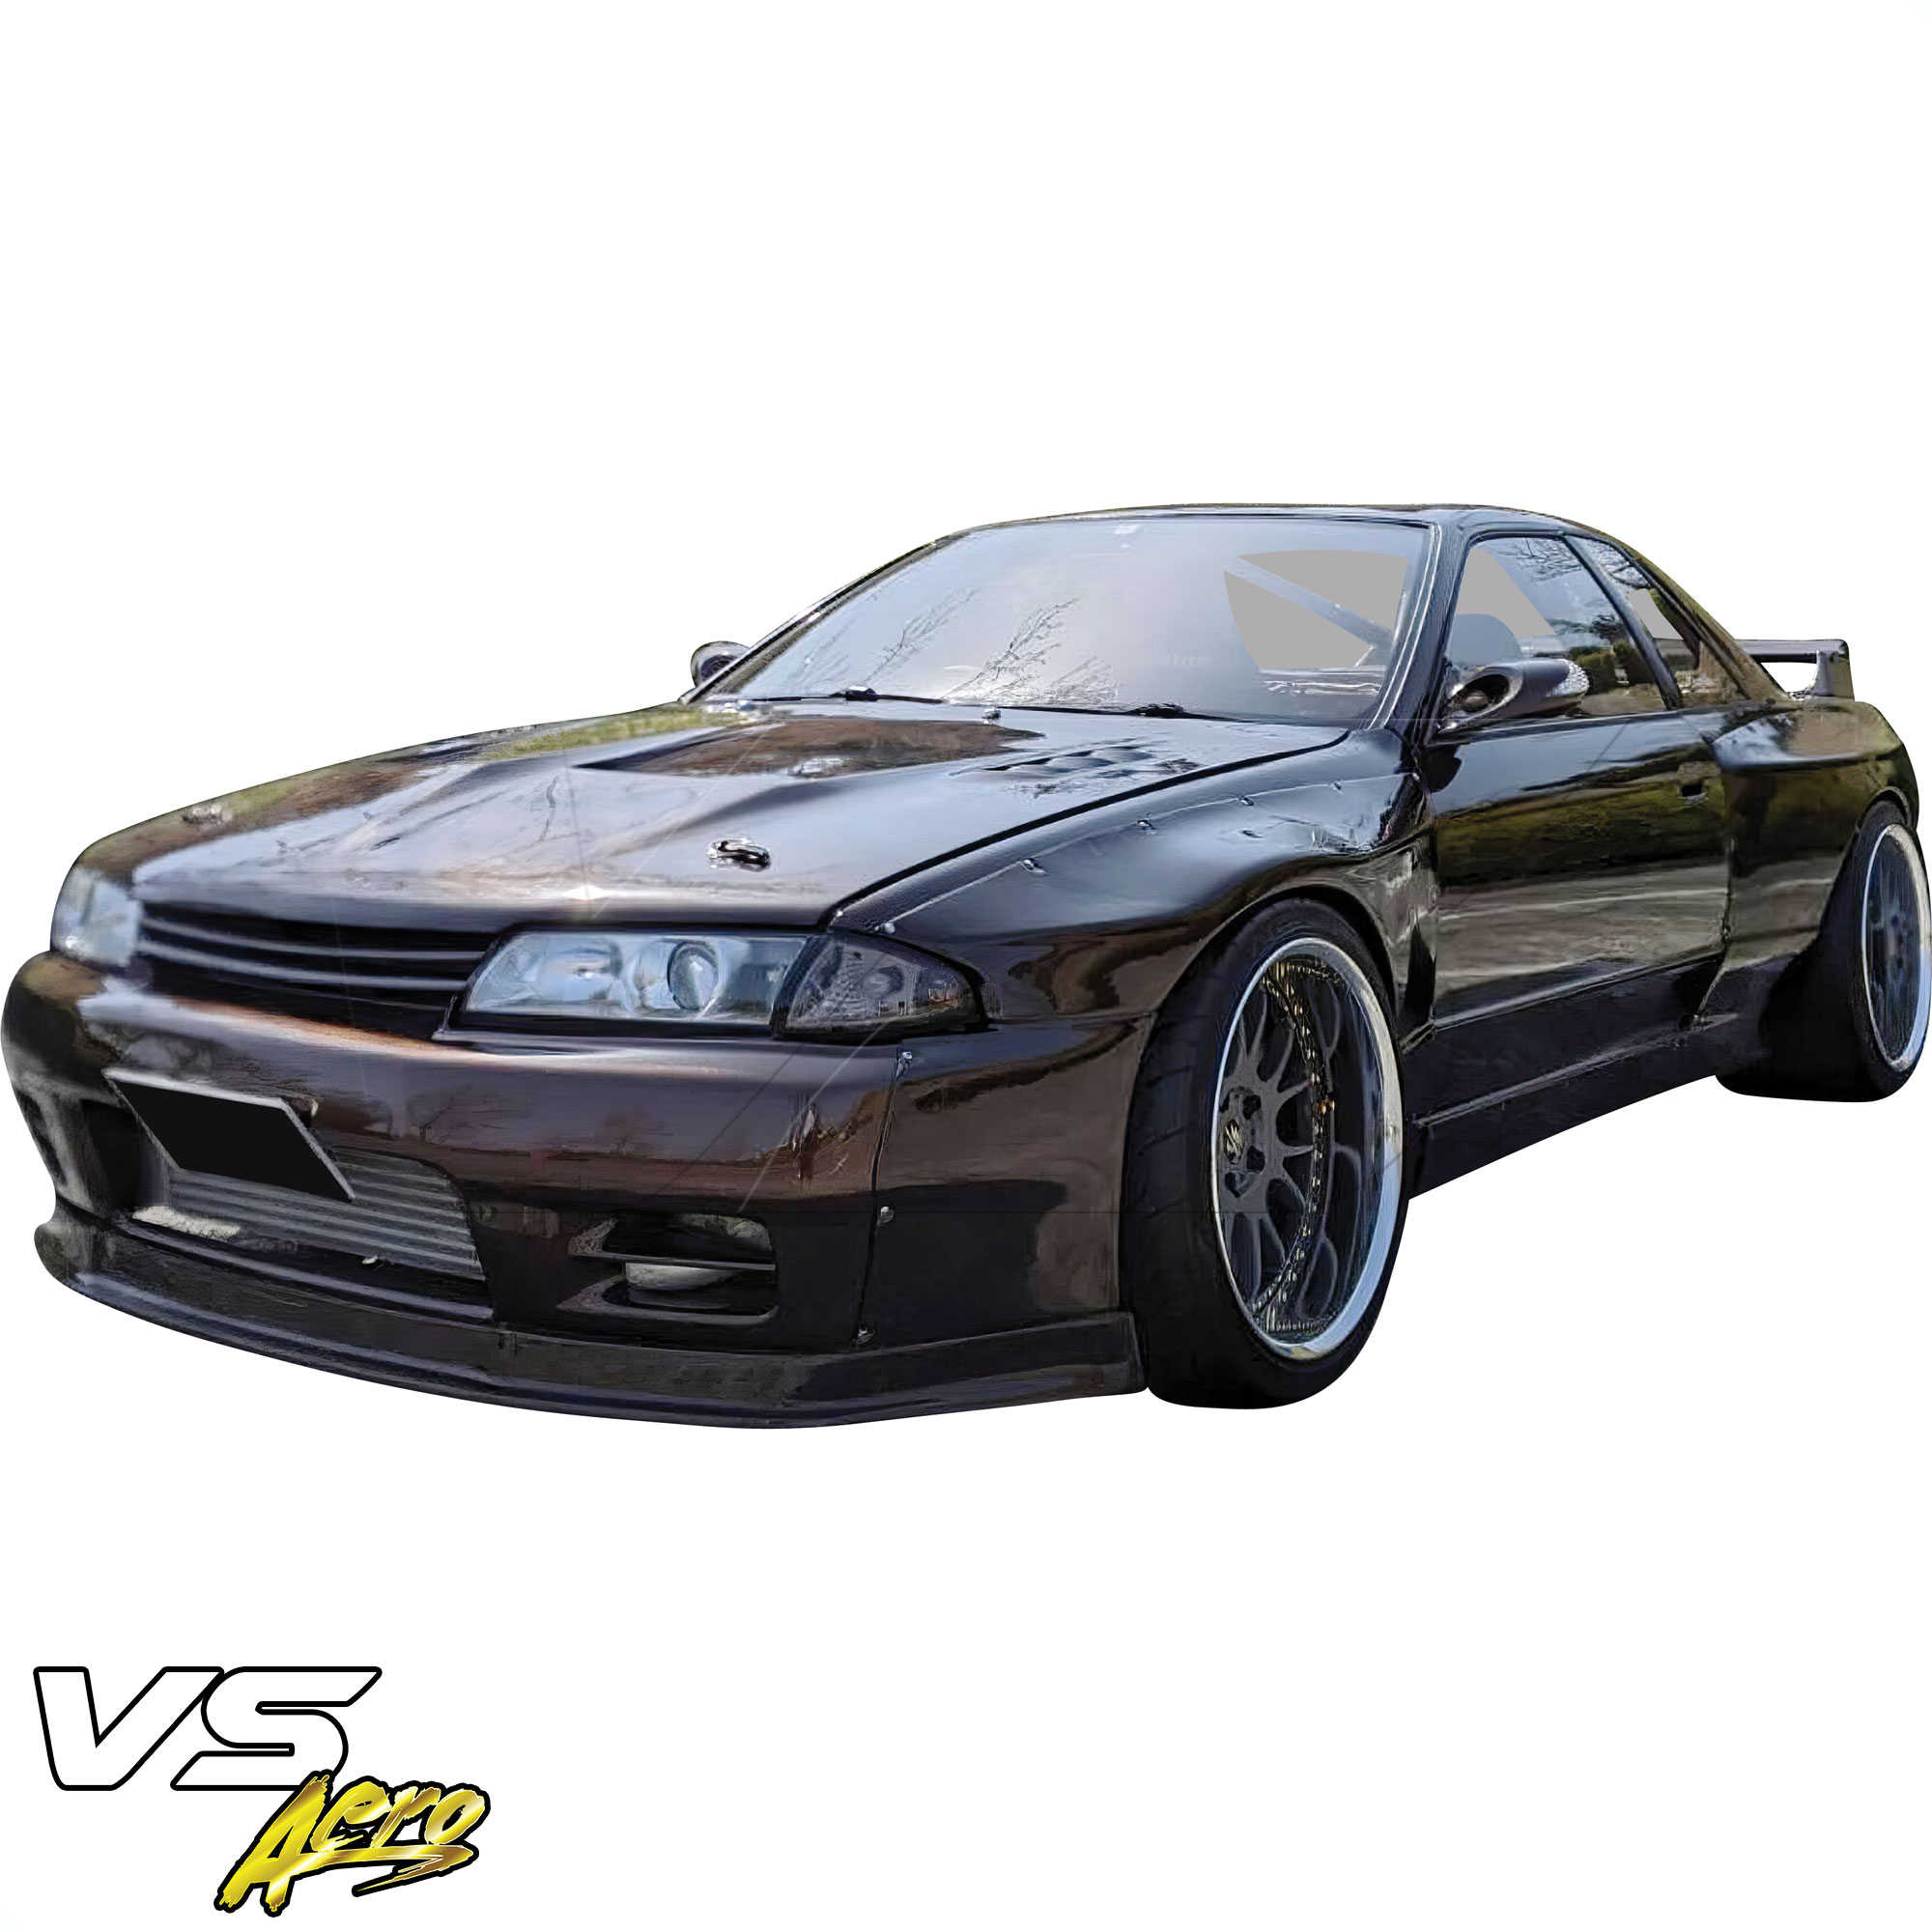 VSaero FRP TKYO Wide Body 40mm Fender Flares (front) 4pc > Nissan Skyline R32 1990-1994 > 2dr Coupe - Image 12